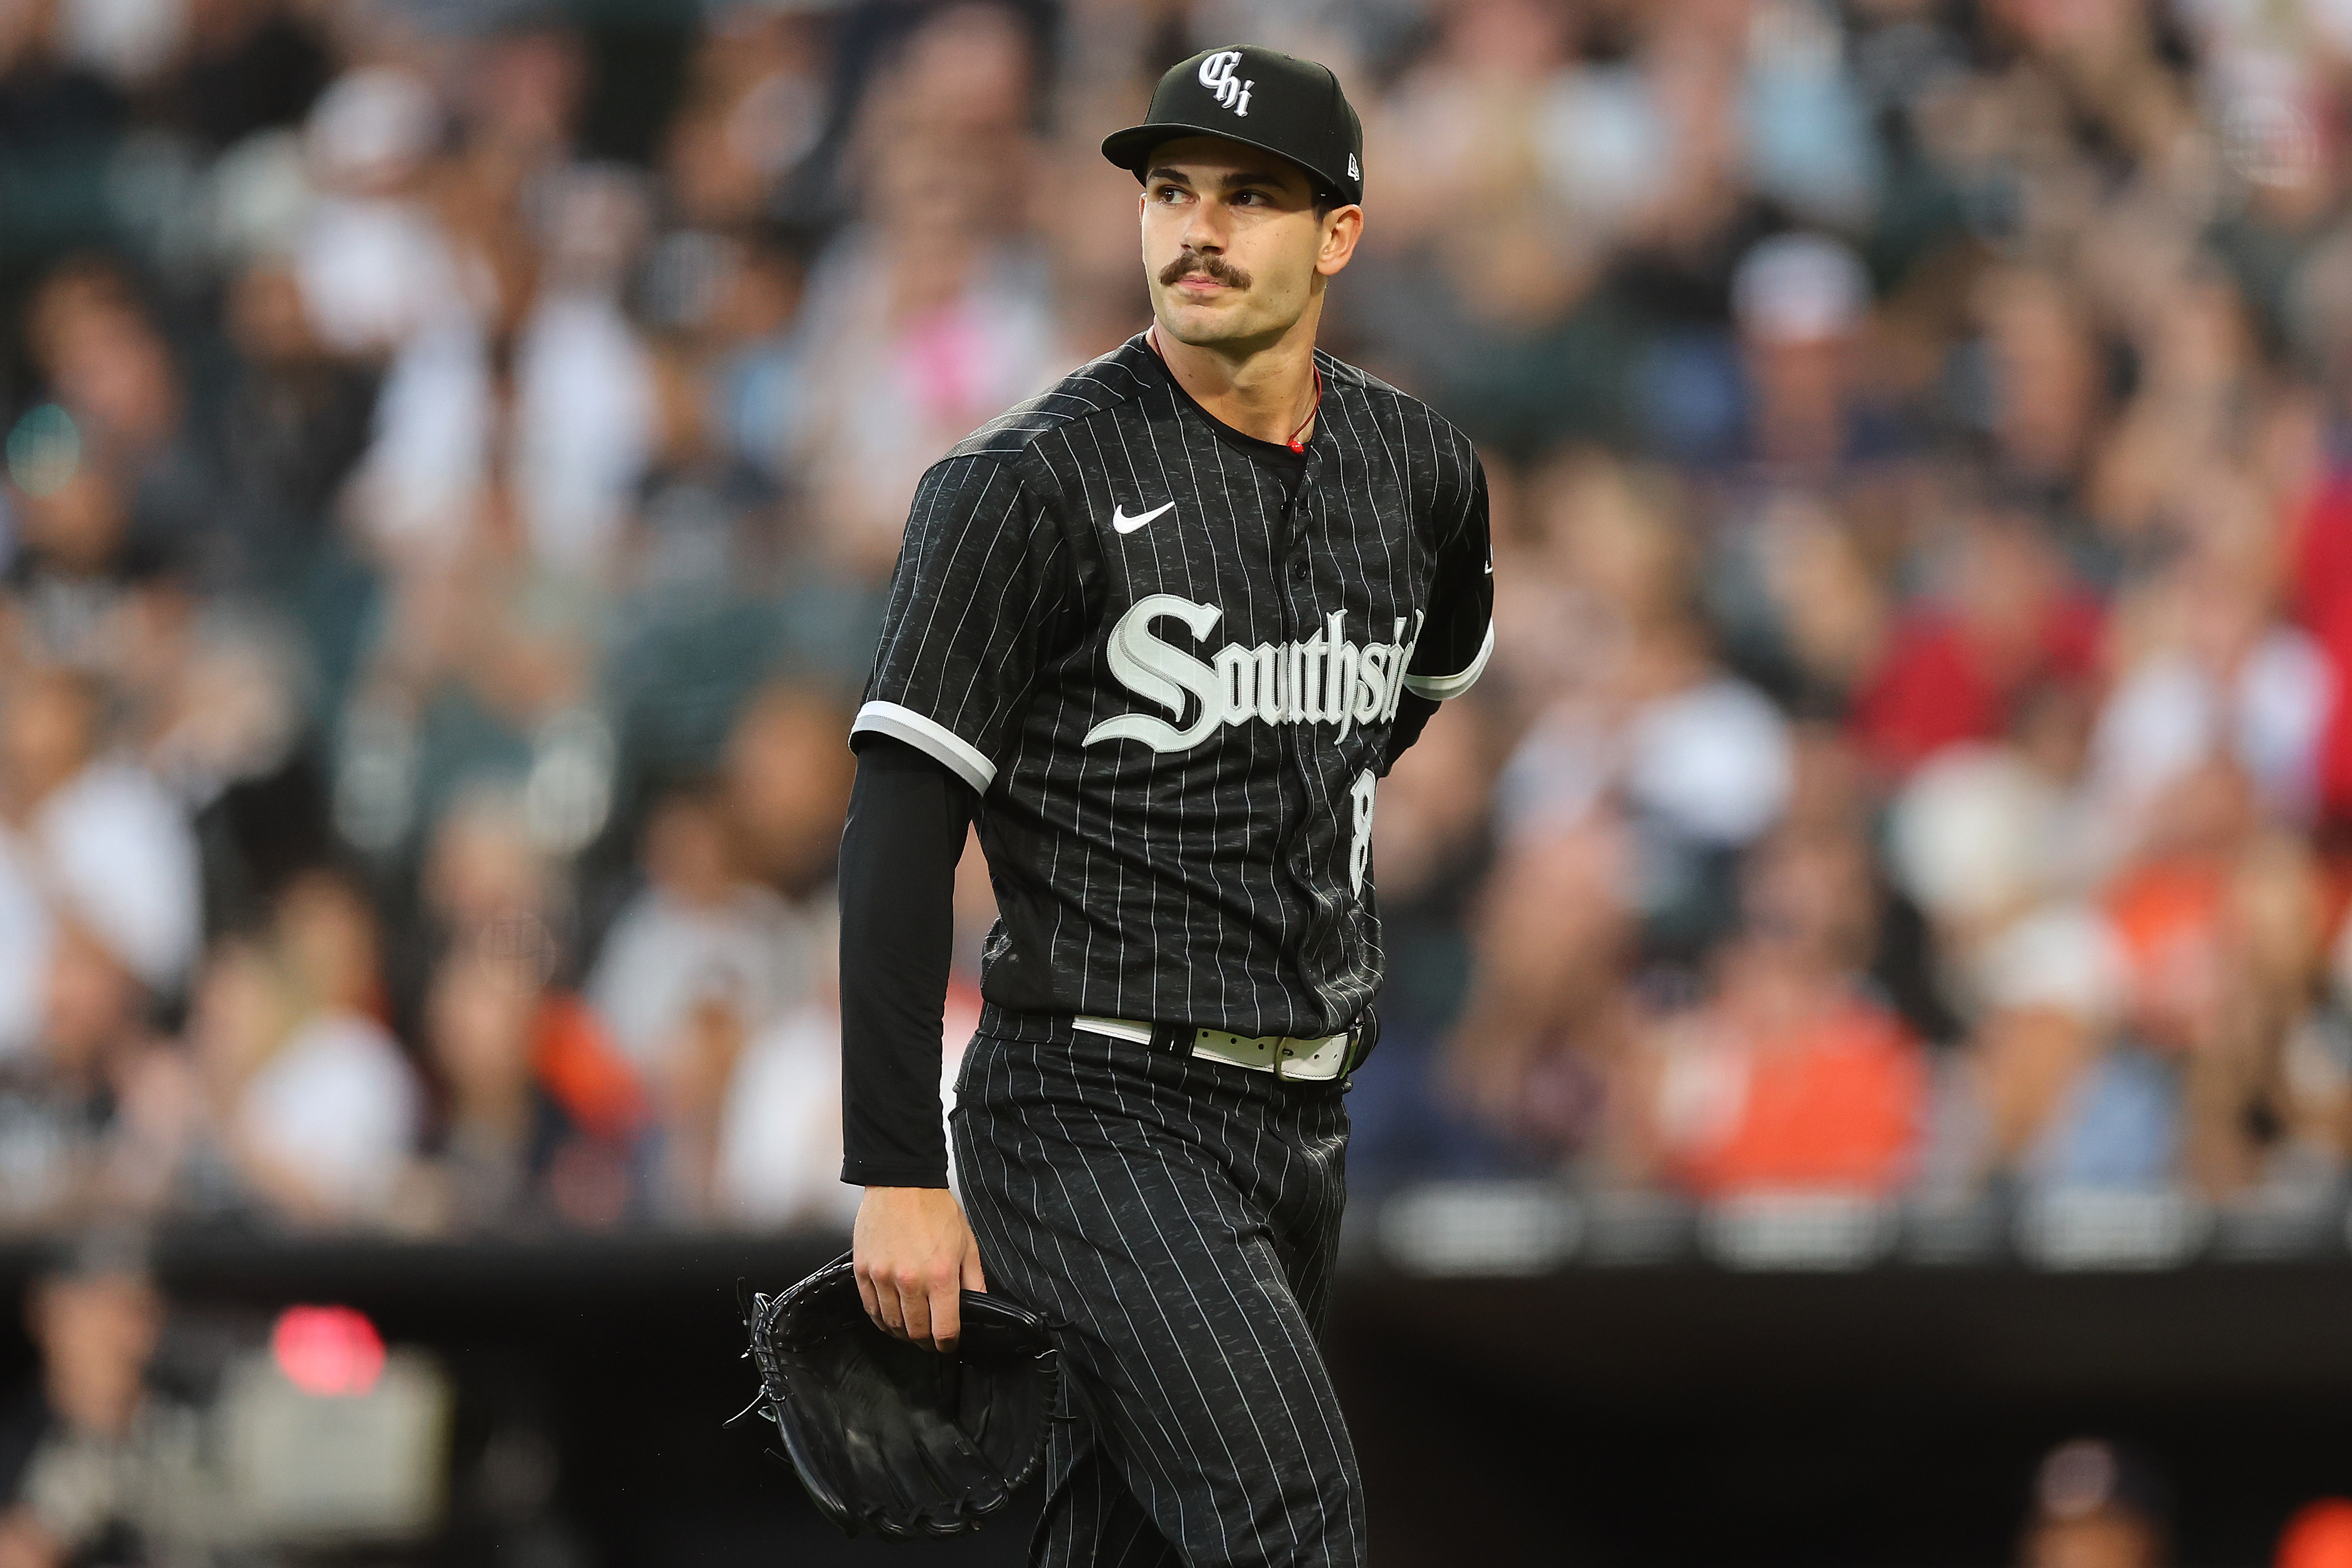 Cubs vs. White Sox: Odds, spread, over/under - August 16